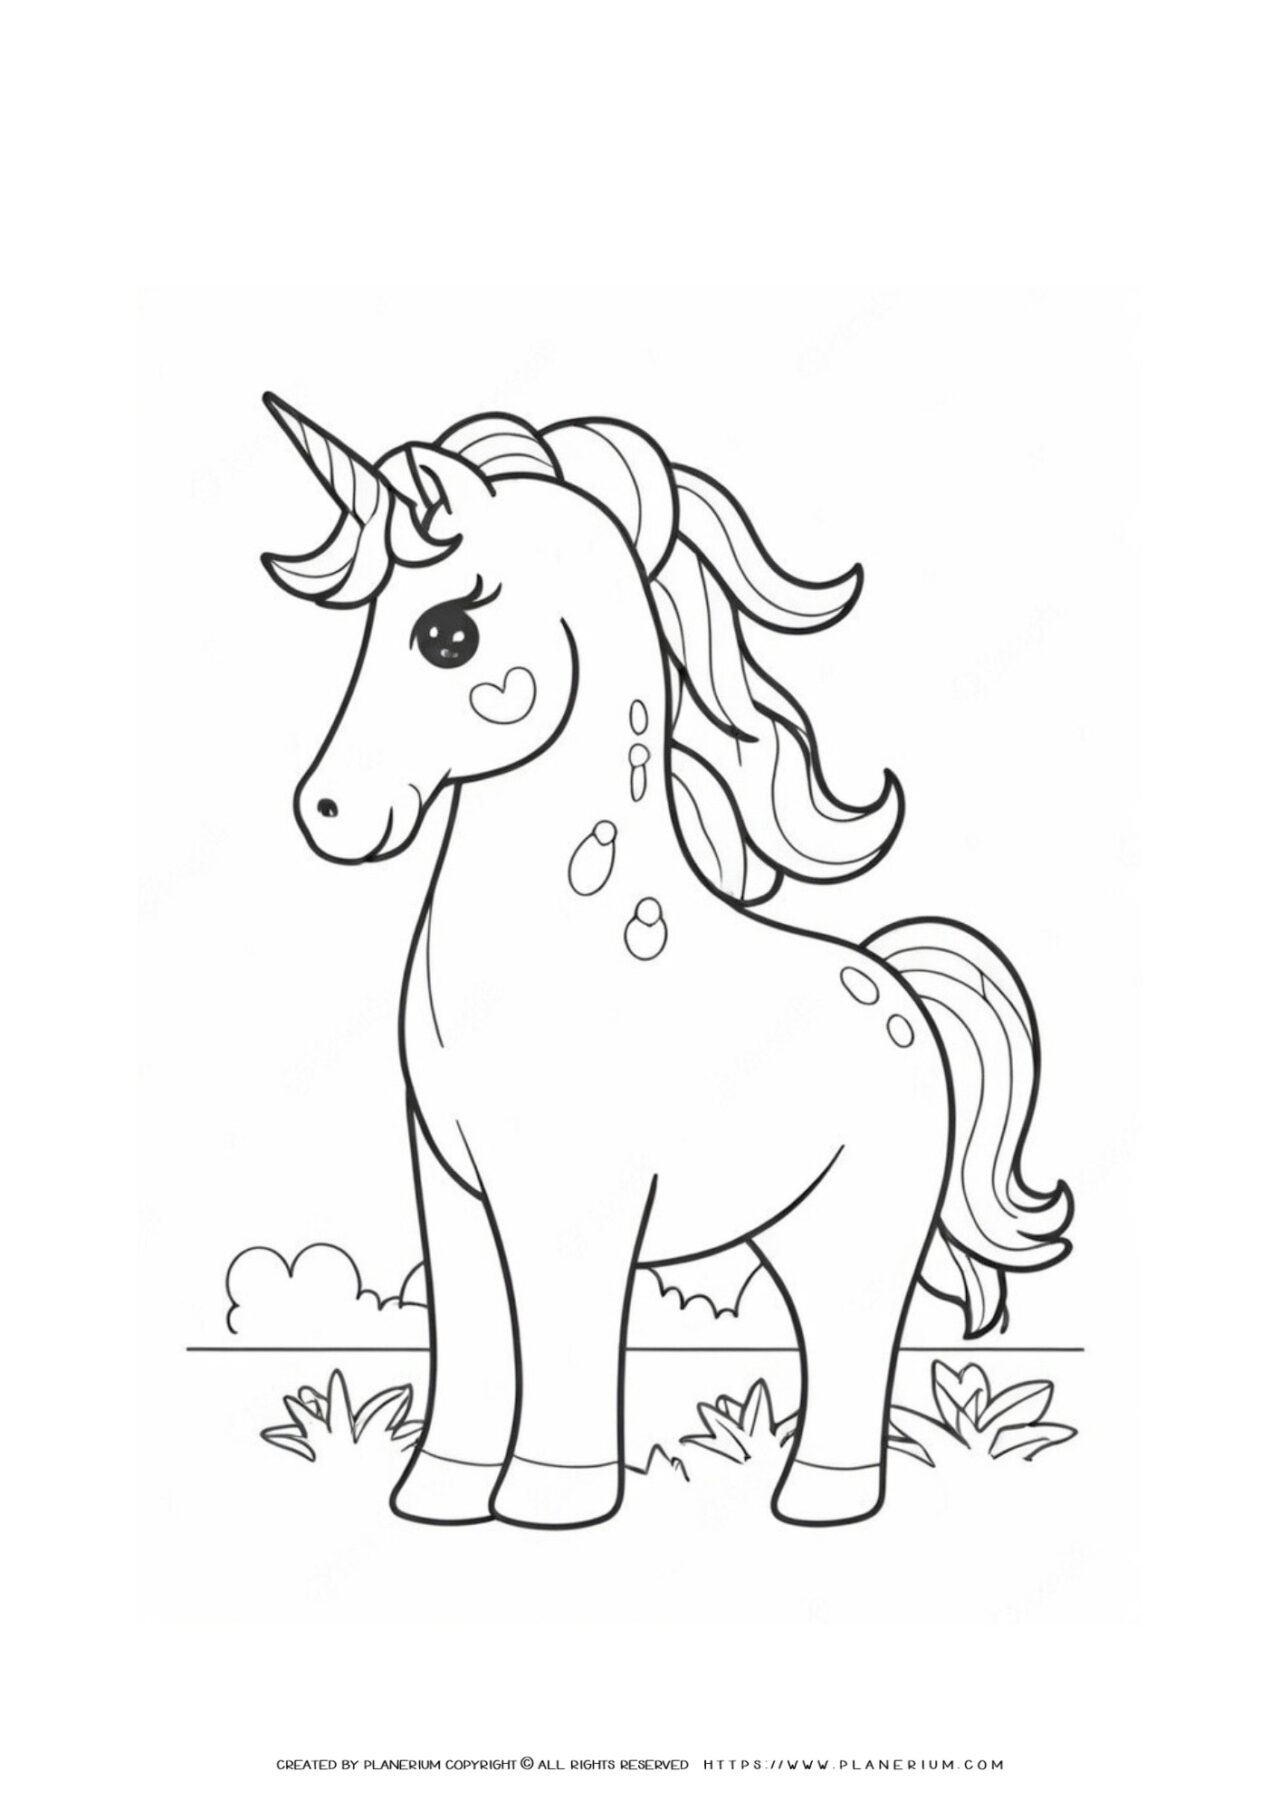 Unicorn coloring page for children.